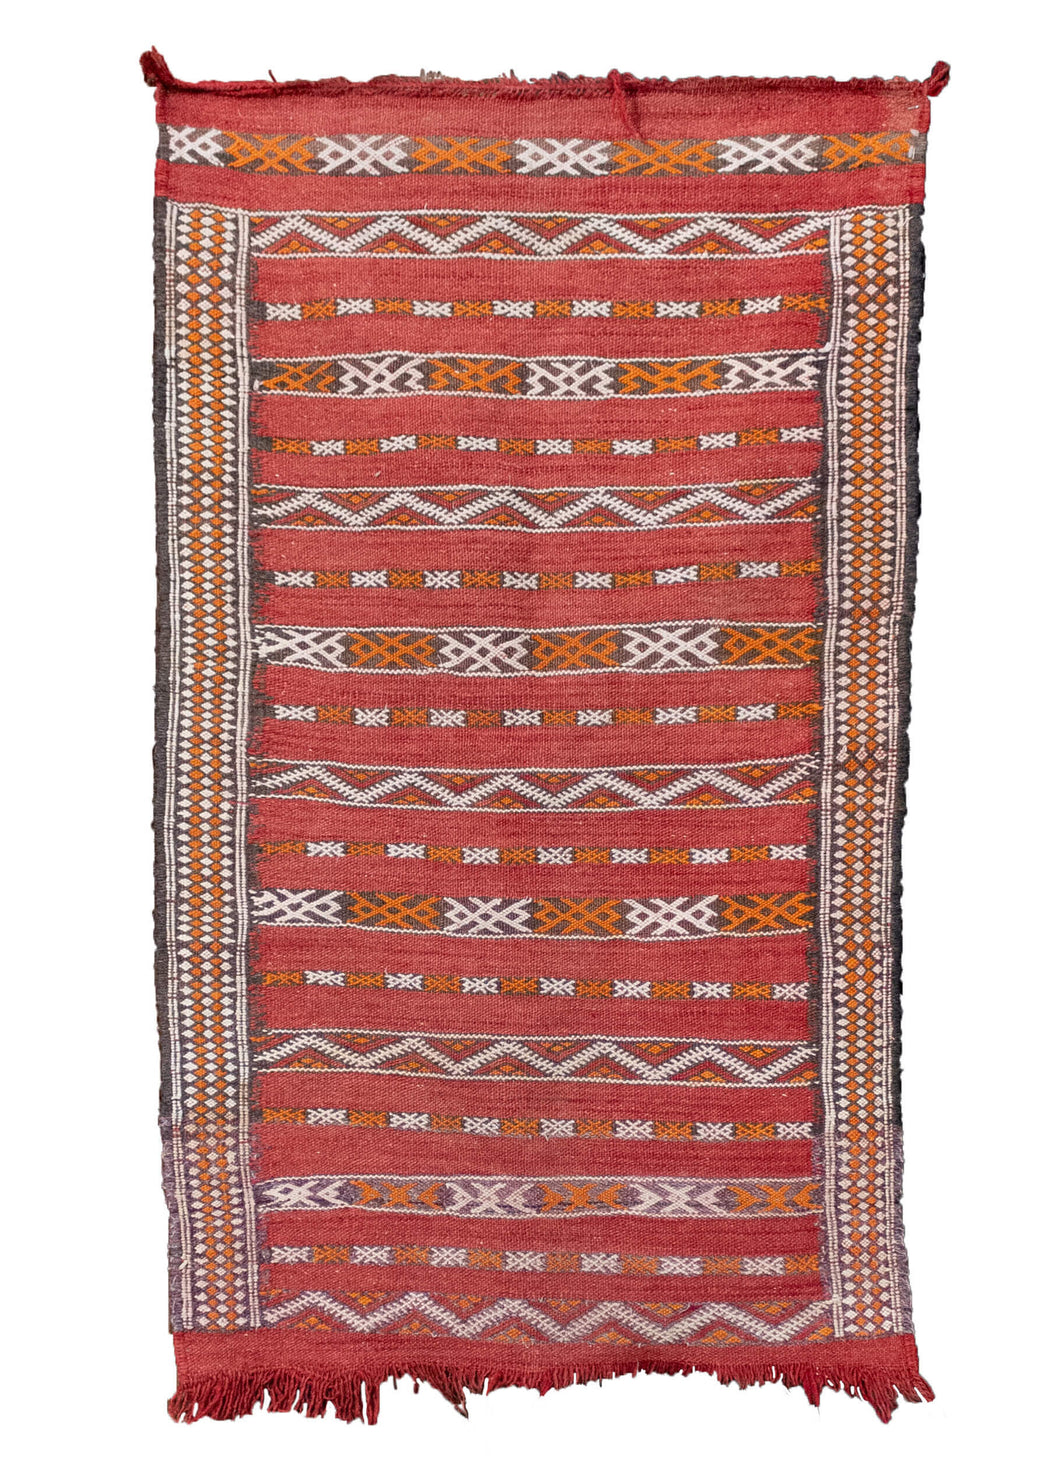 Vintage Moroccan kilim with a striped geometric design in black, white and, orange on a red ground. In fair condition, with some signs of wear but structurally sound. 